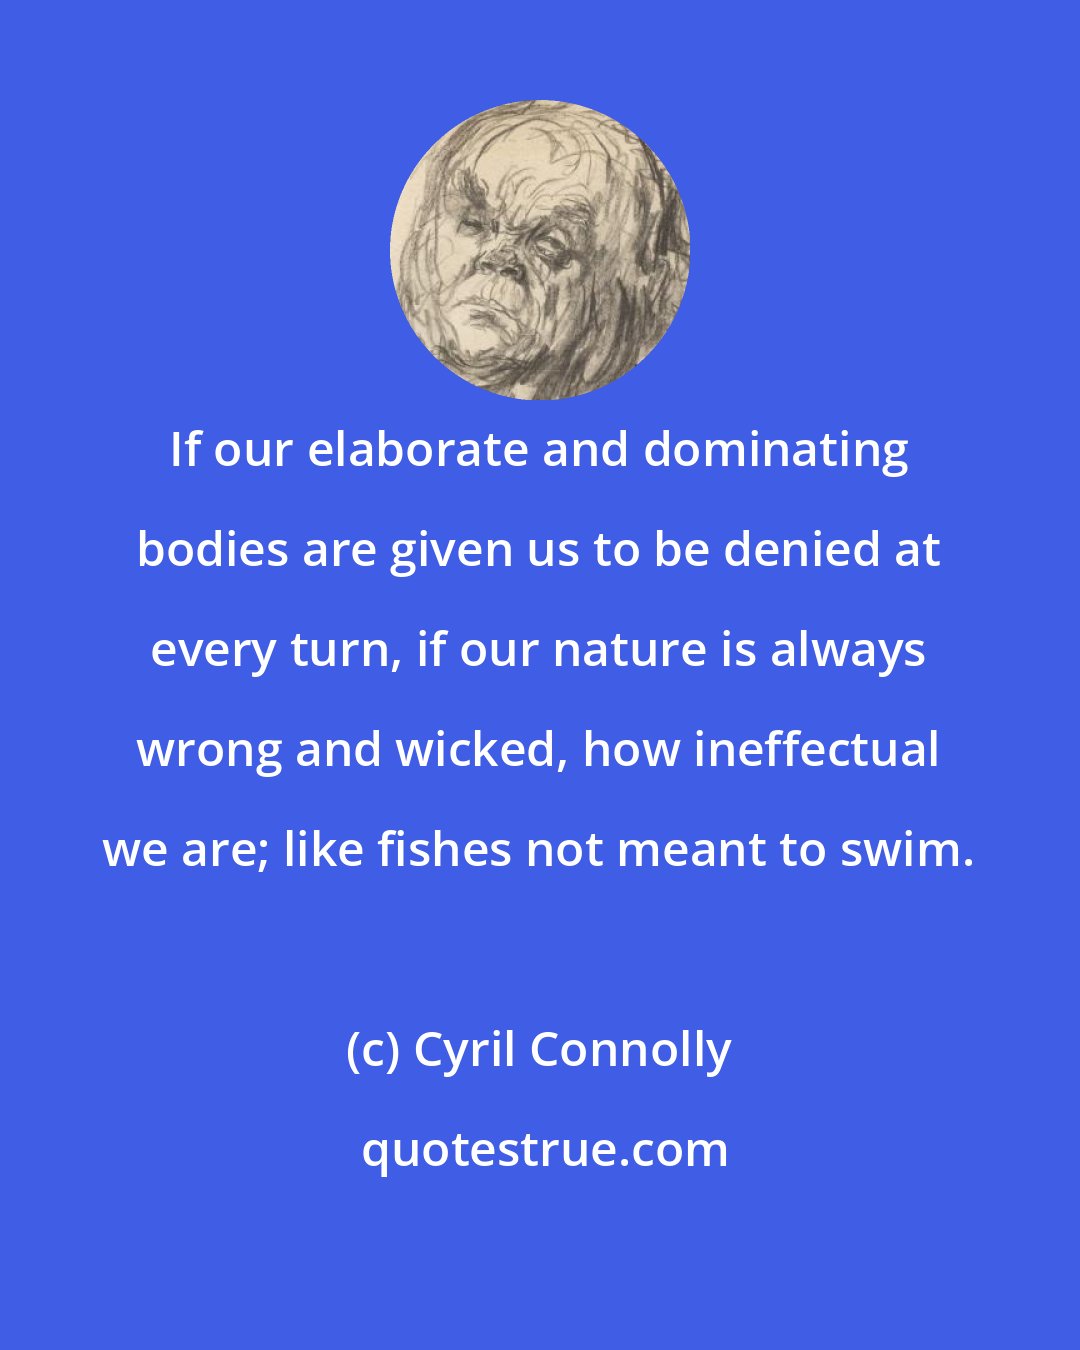 Cyril Connolly: If our elaborate and dominating bodies are given us to be denied at every turn, if our nature is always wrong and wicked, how ineffectual we are; like fishes not meant to swim.